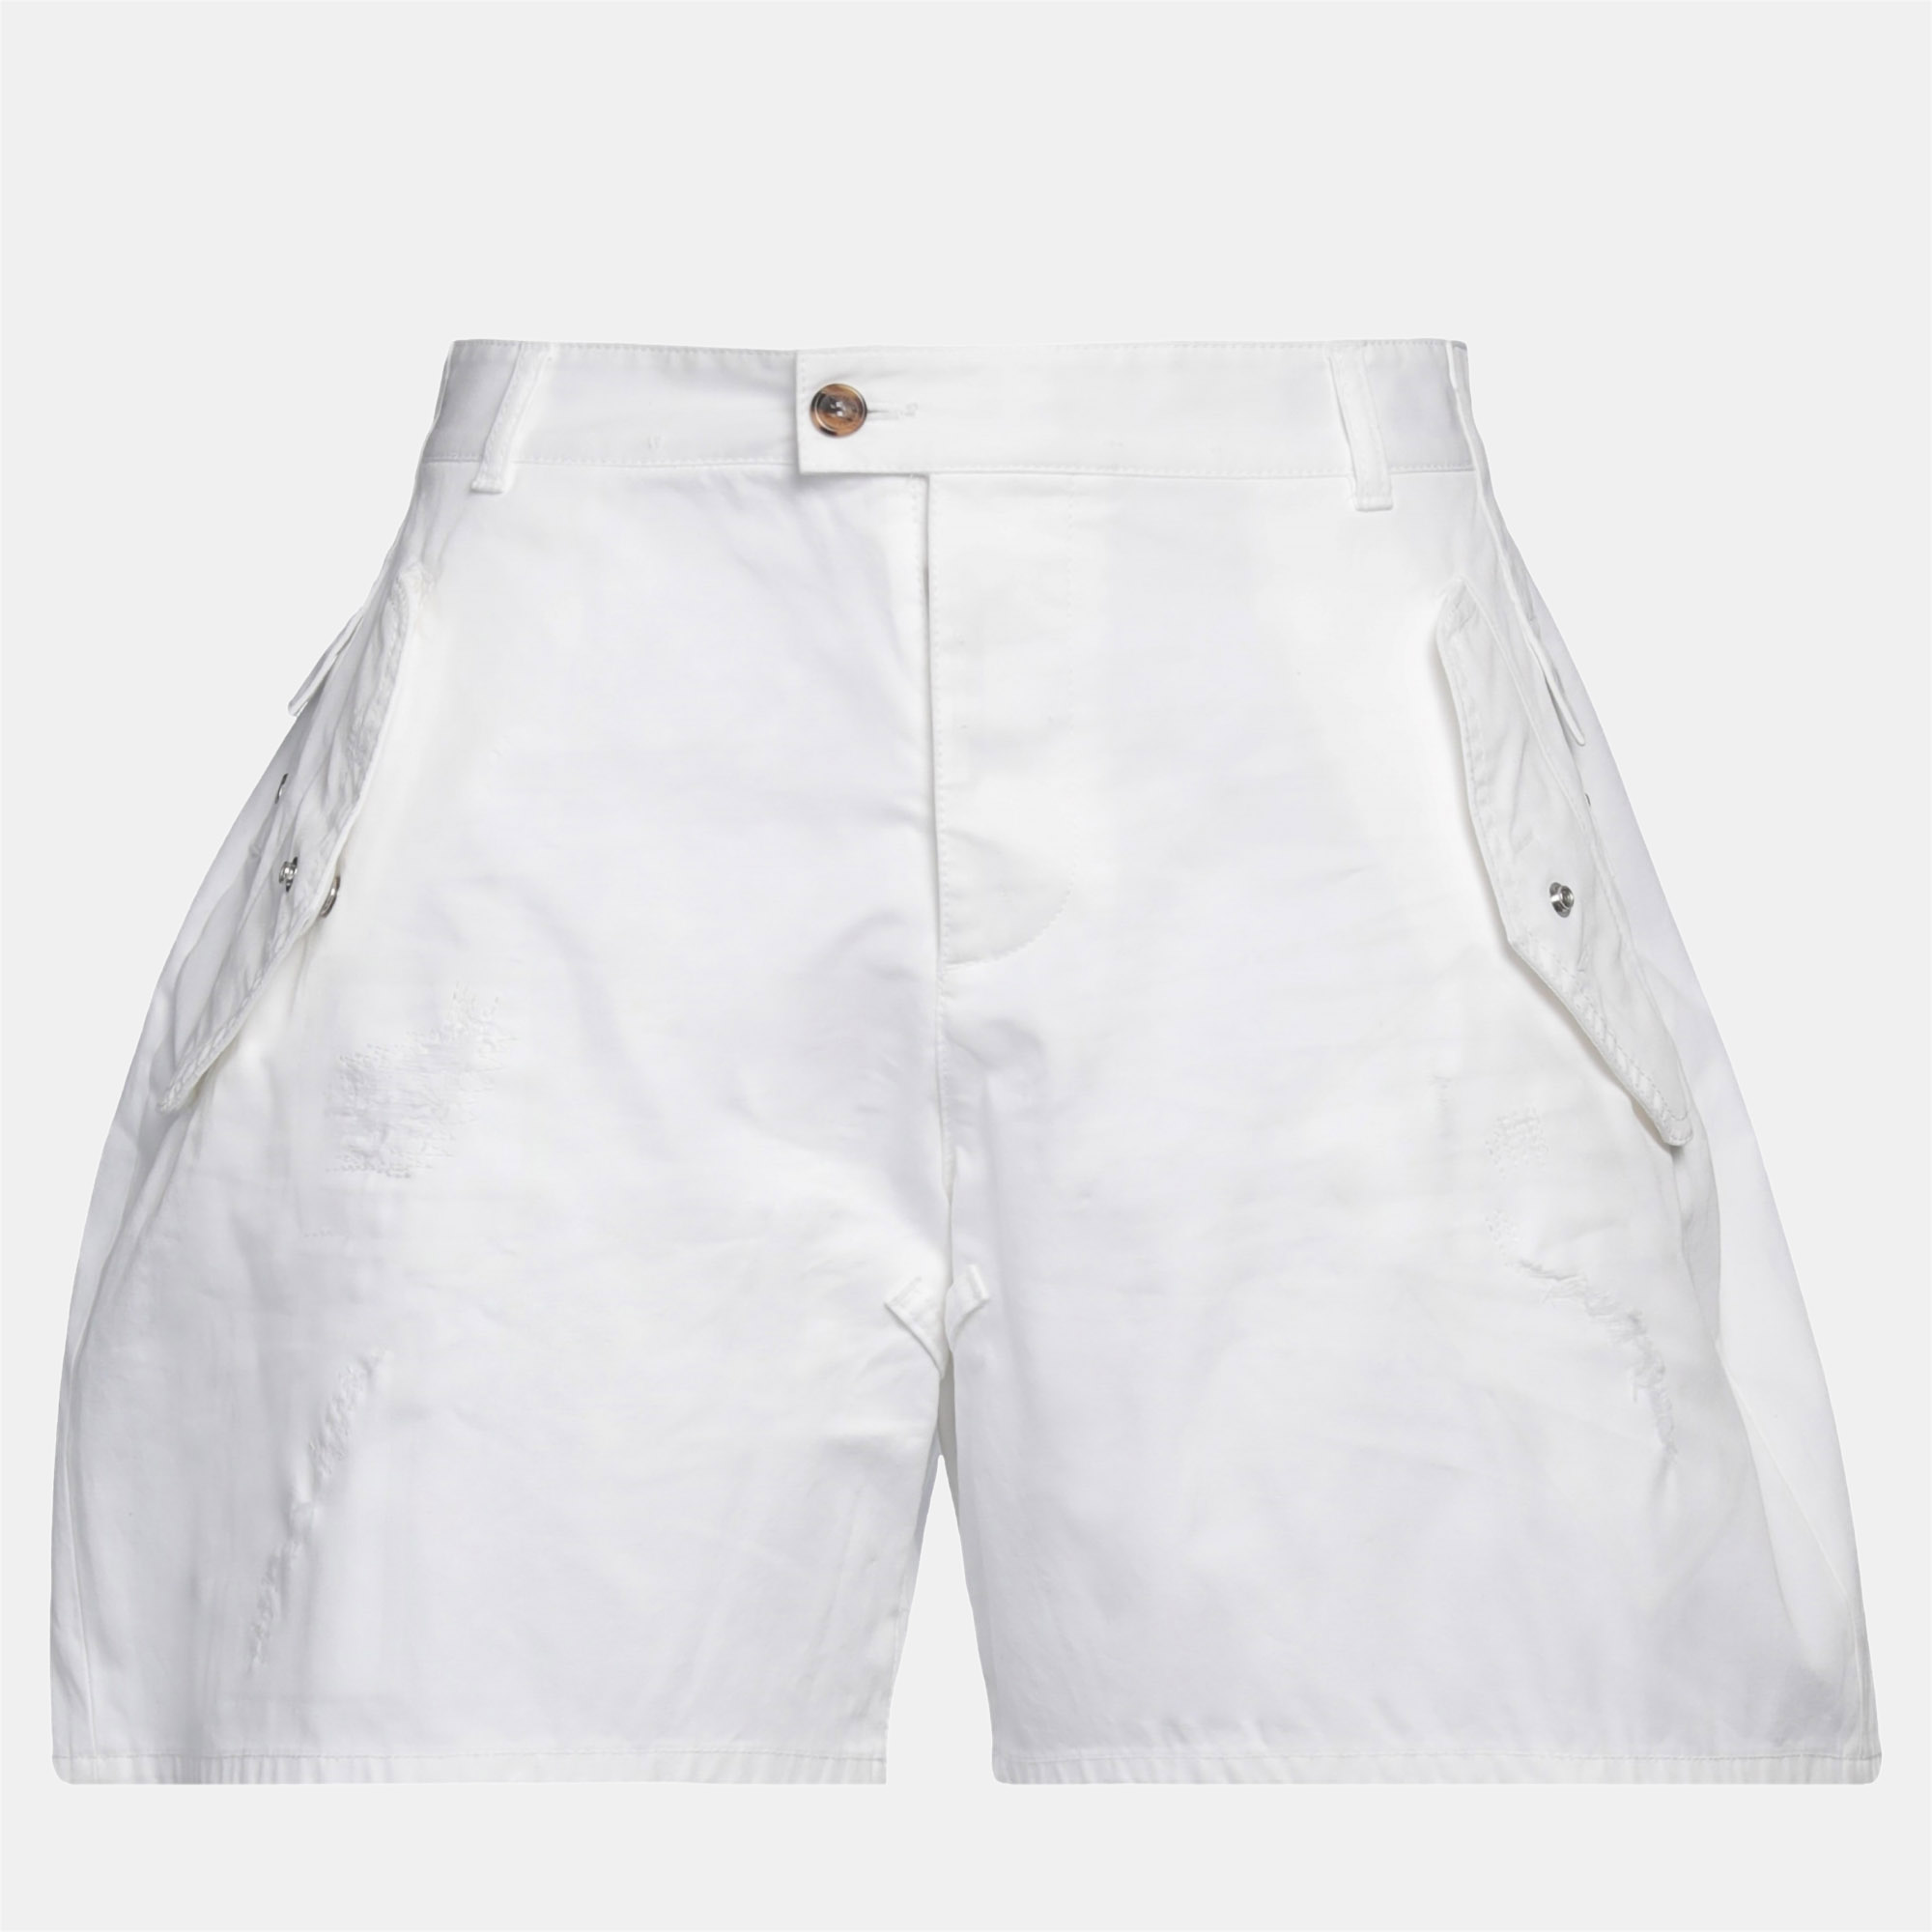 Sophistication blends with expert tailoring in these designer shorts. Made from premium materials they provide a sleek silhouette and enduring comfort. Perfect for versatile styling theyre a wardrobe essential youll reach for time and again.